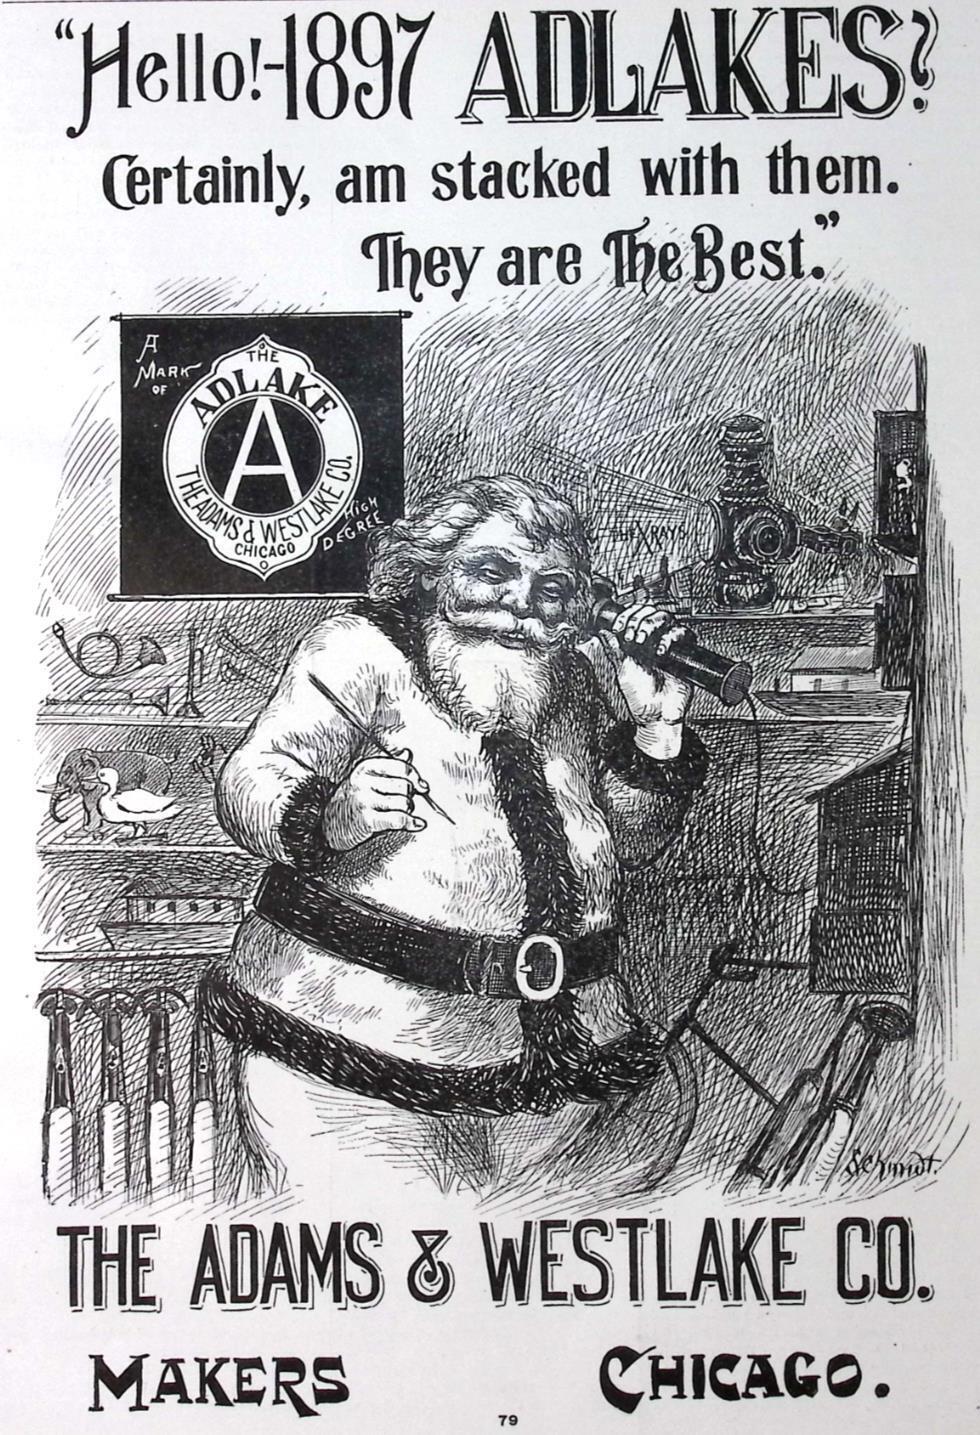 1896 Adlake Bicycles for 1897 They Are the Best SANTA Christmas Bicycle Print Ad